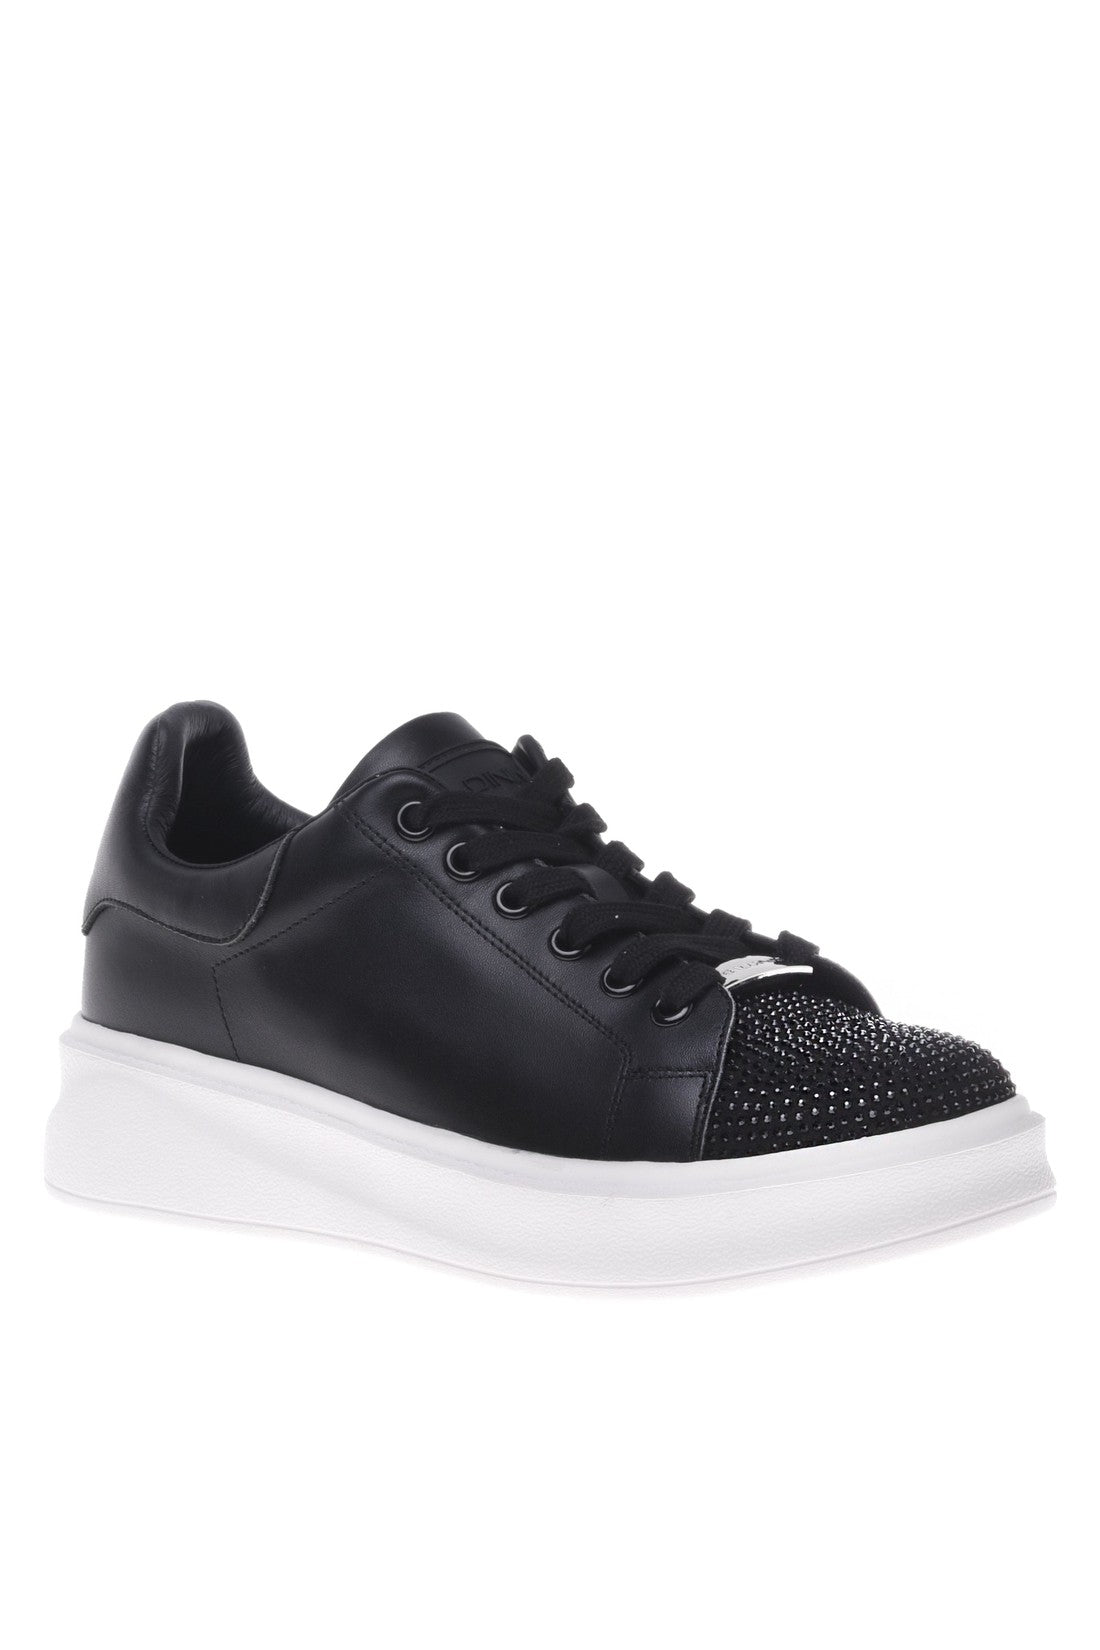 BALDININI-OUTLET-SALE-Sneaker-in-black-calfskin-with-rhinestones-Sneaker-35-ARCHIVE-COLLECTION_23c6867d-21ab-4382-be51-9930665c67d8.jpg